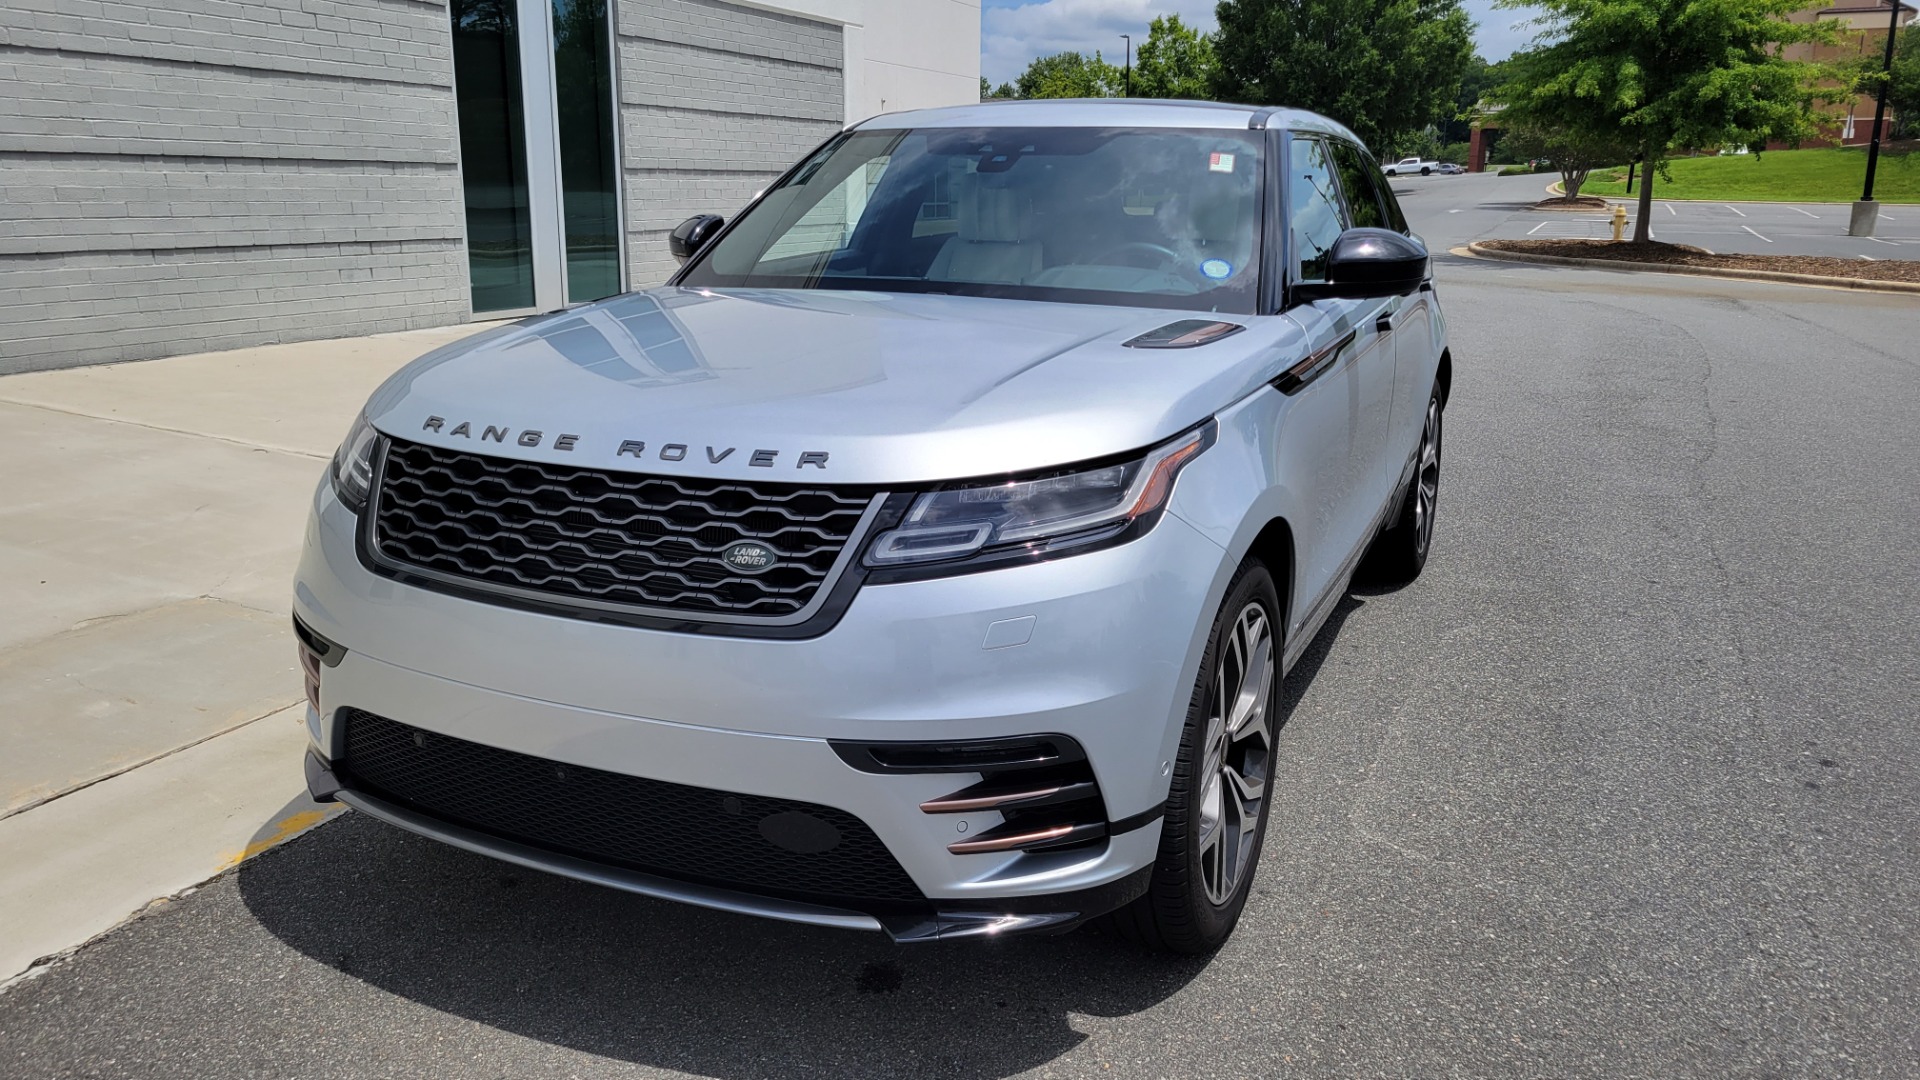 Used 2018 Land Rover RANGE ROVER VELAR R-DYNAMIC / NAV / MERIDIAN / SUNROOF / CAMERA for sale $58,995 at Formula Imports in Charlotte NC 28227 2